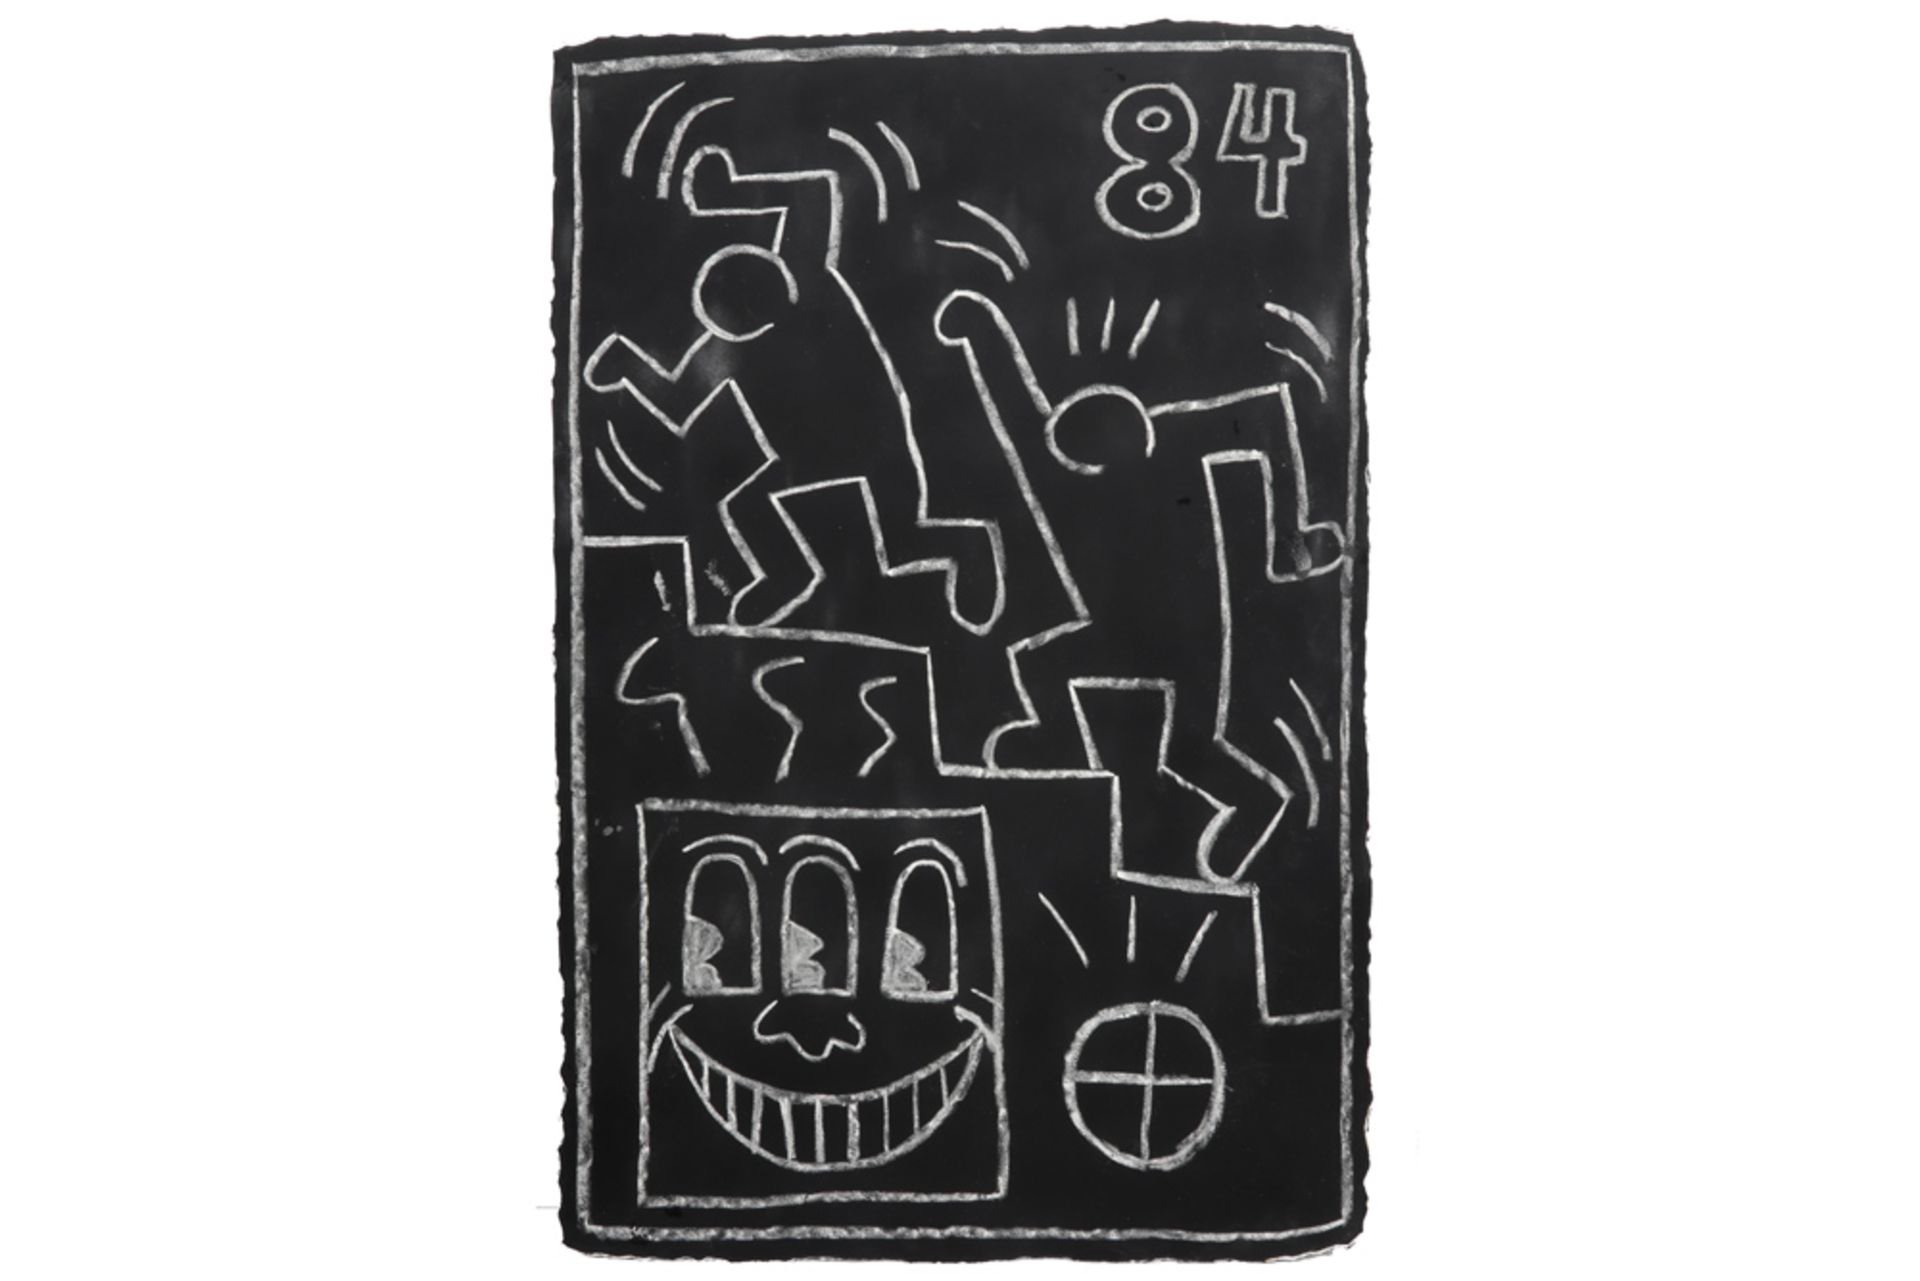 Keith Haring "Subway" drawing with typical figuration with on the back the remains of the posters on